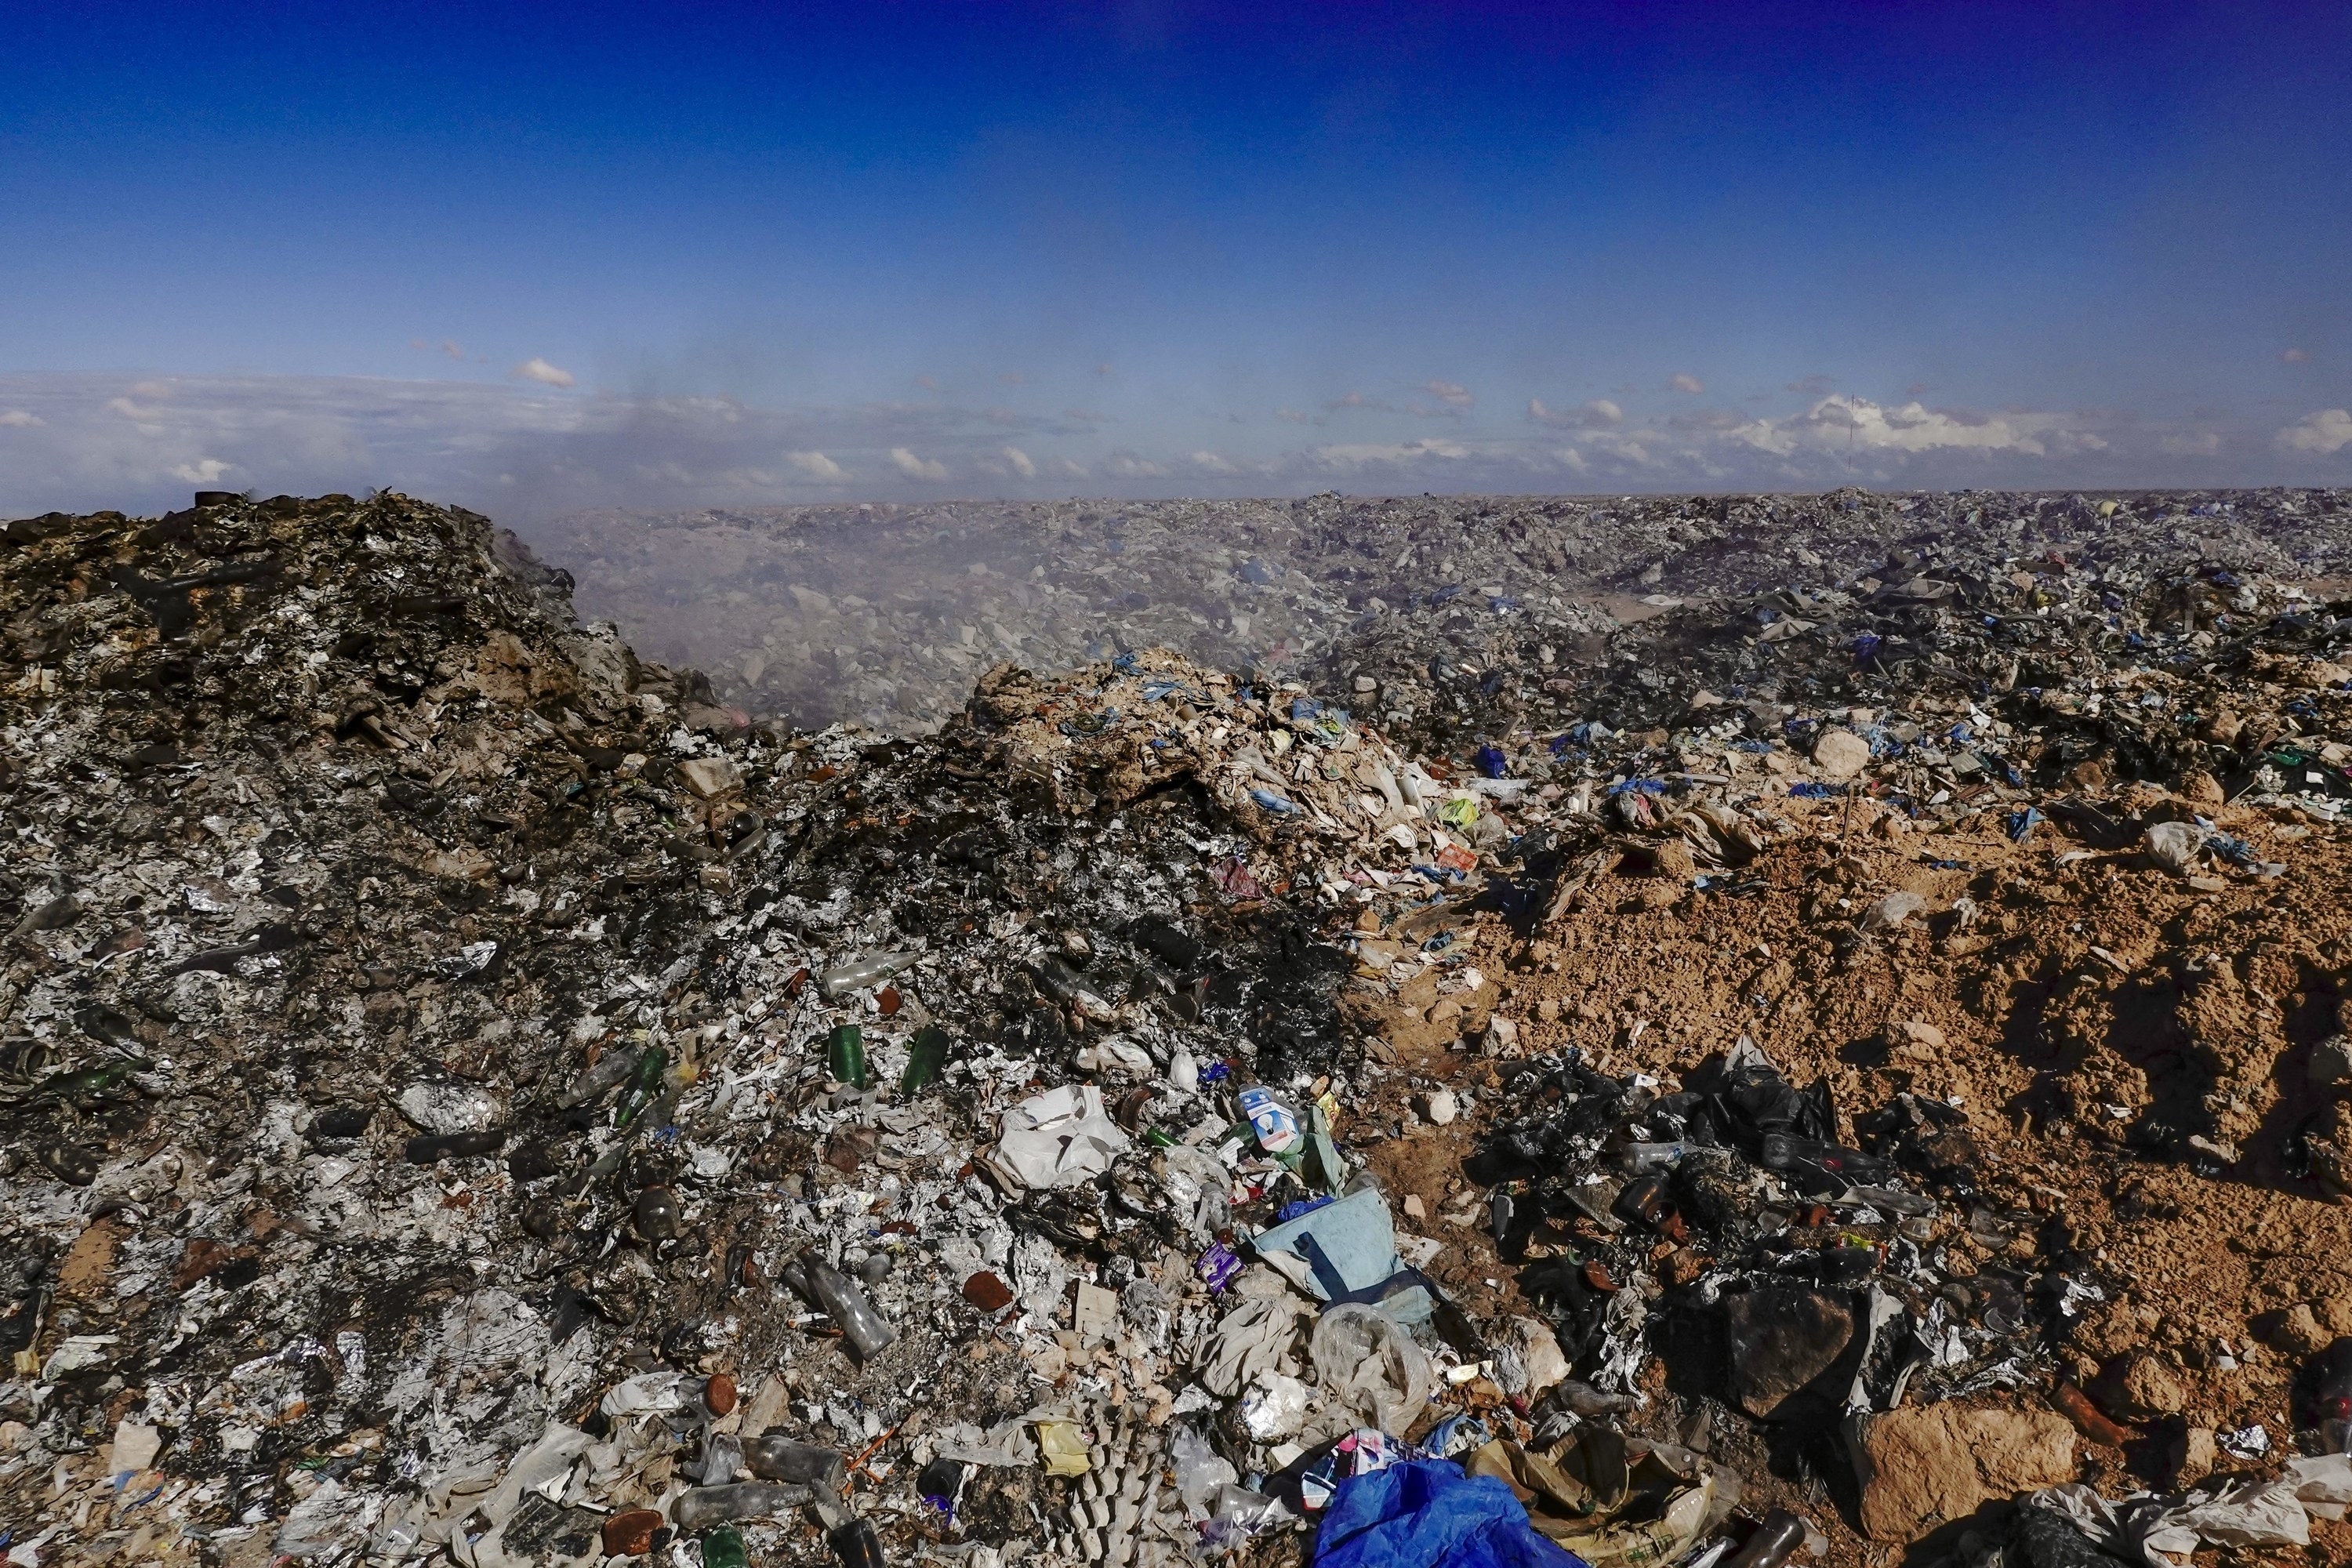 Landscape in Egypt shows mountains of trash in the distance